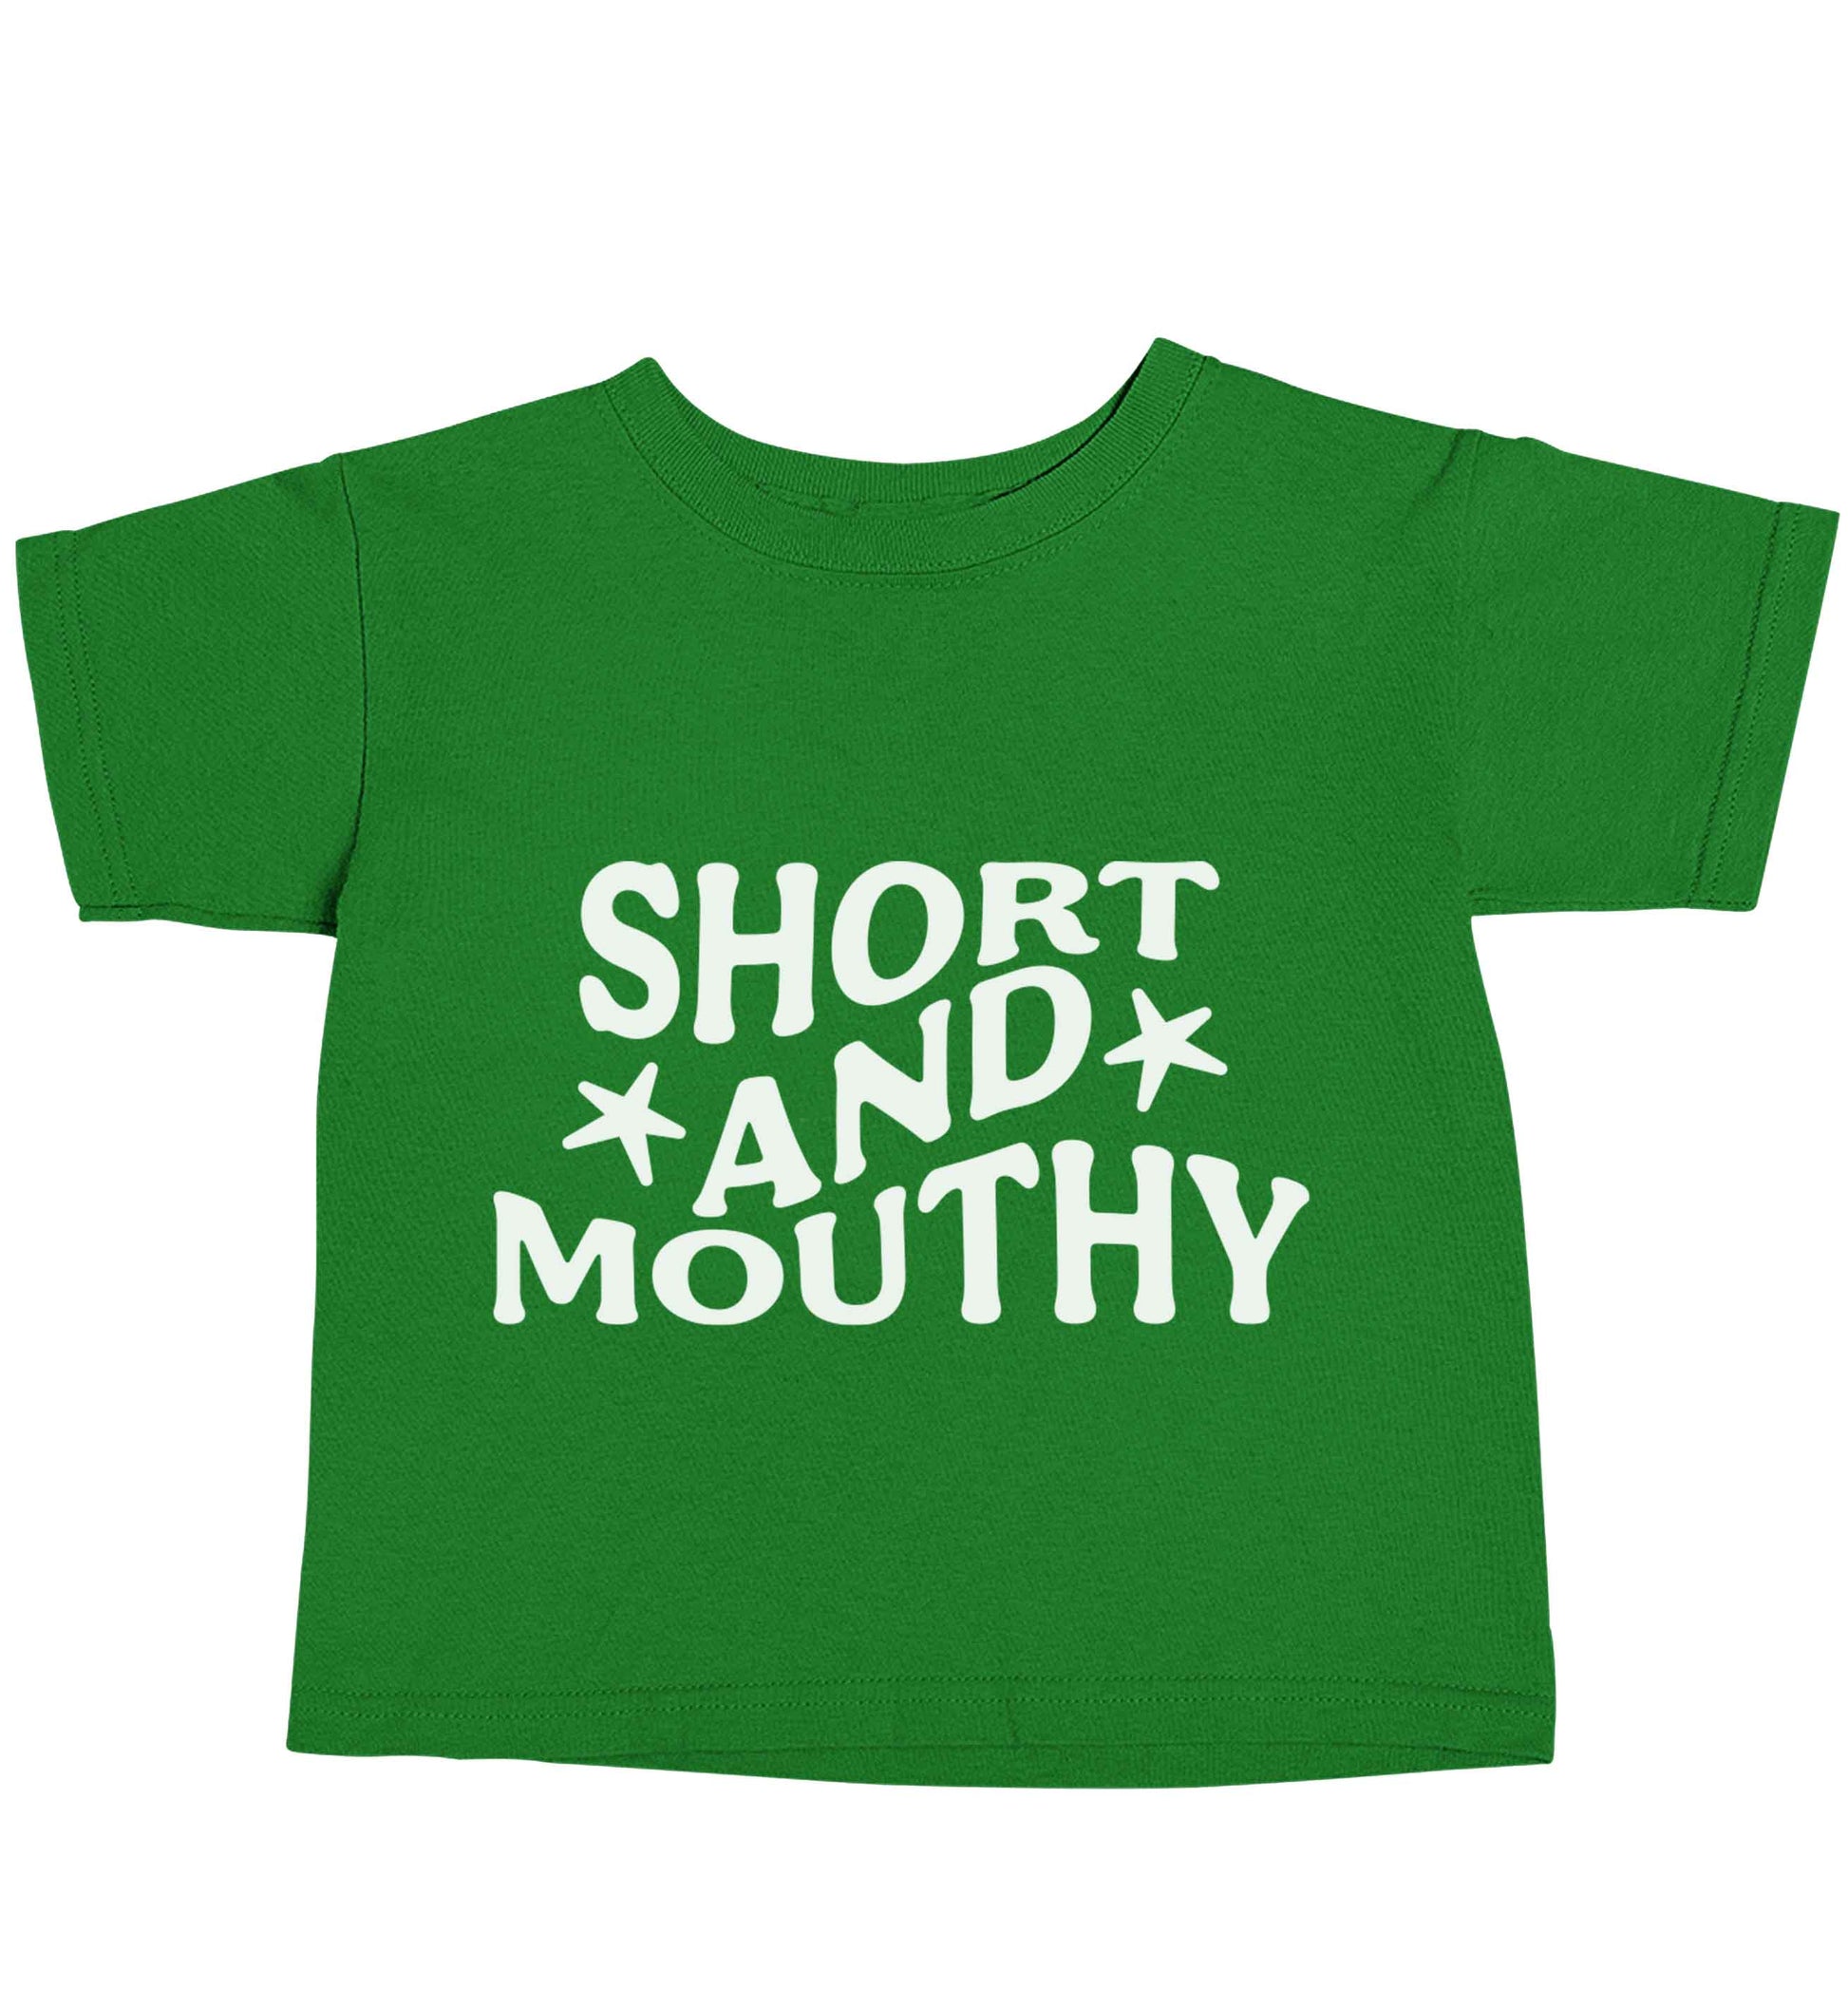 Short and mouthy green baby toddler Tshirt 2 Years